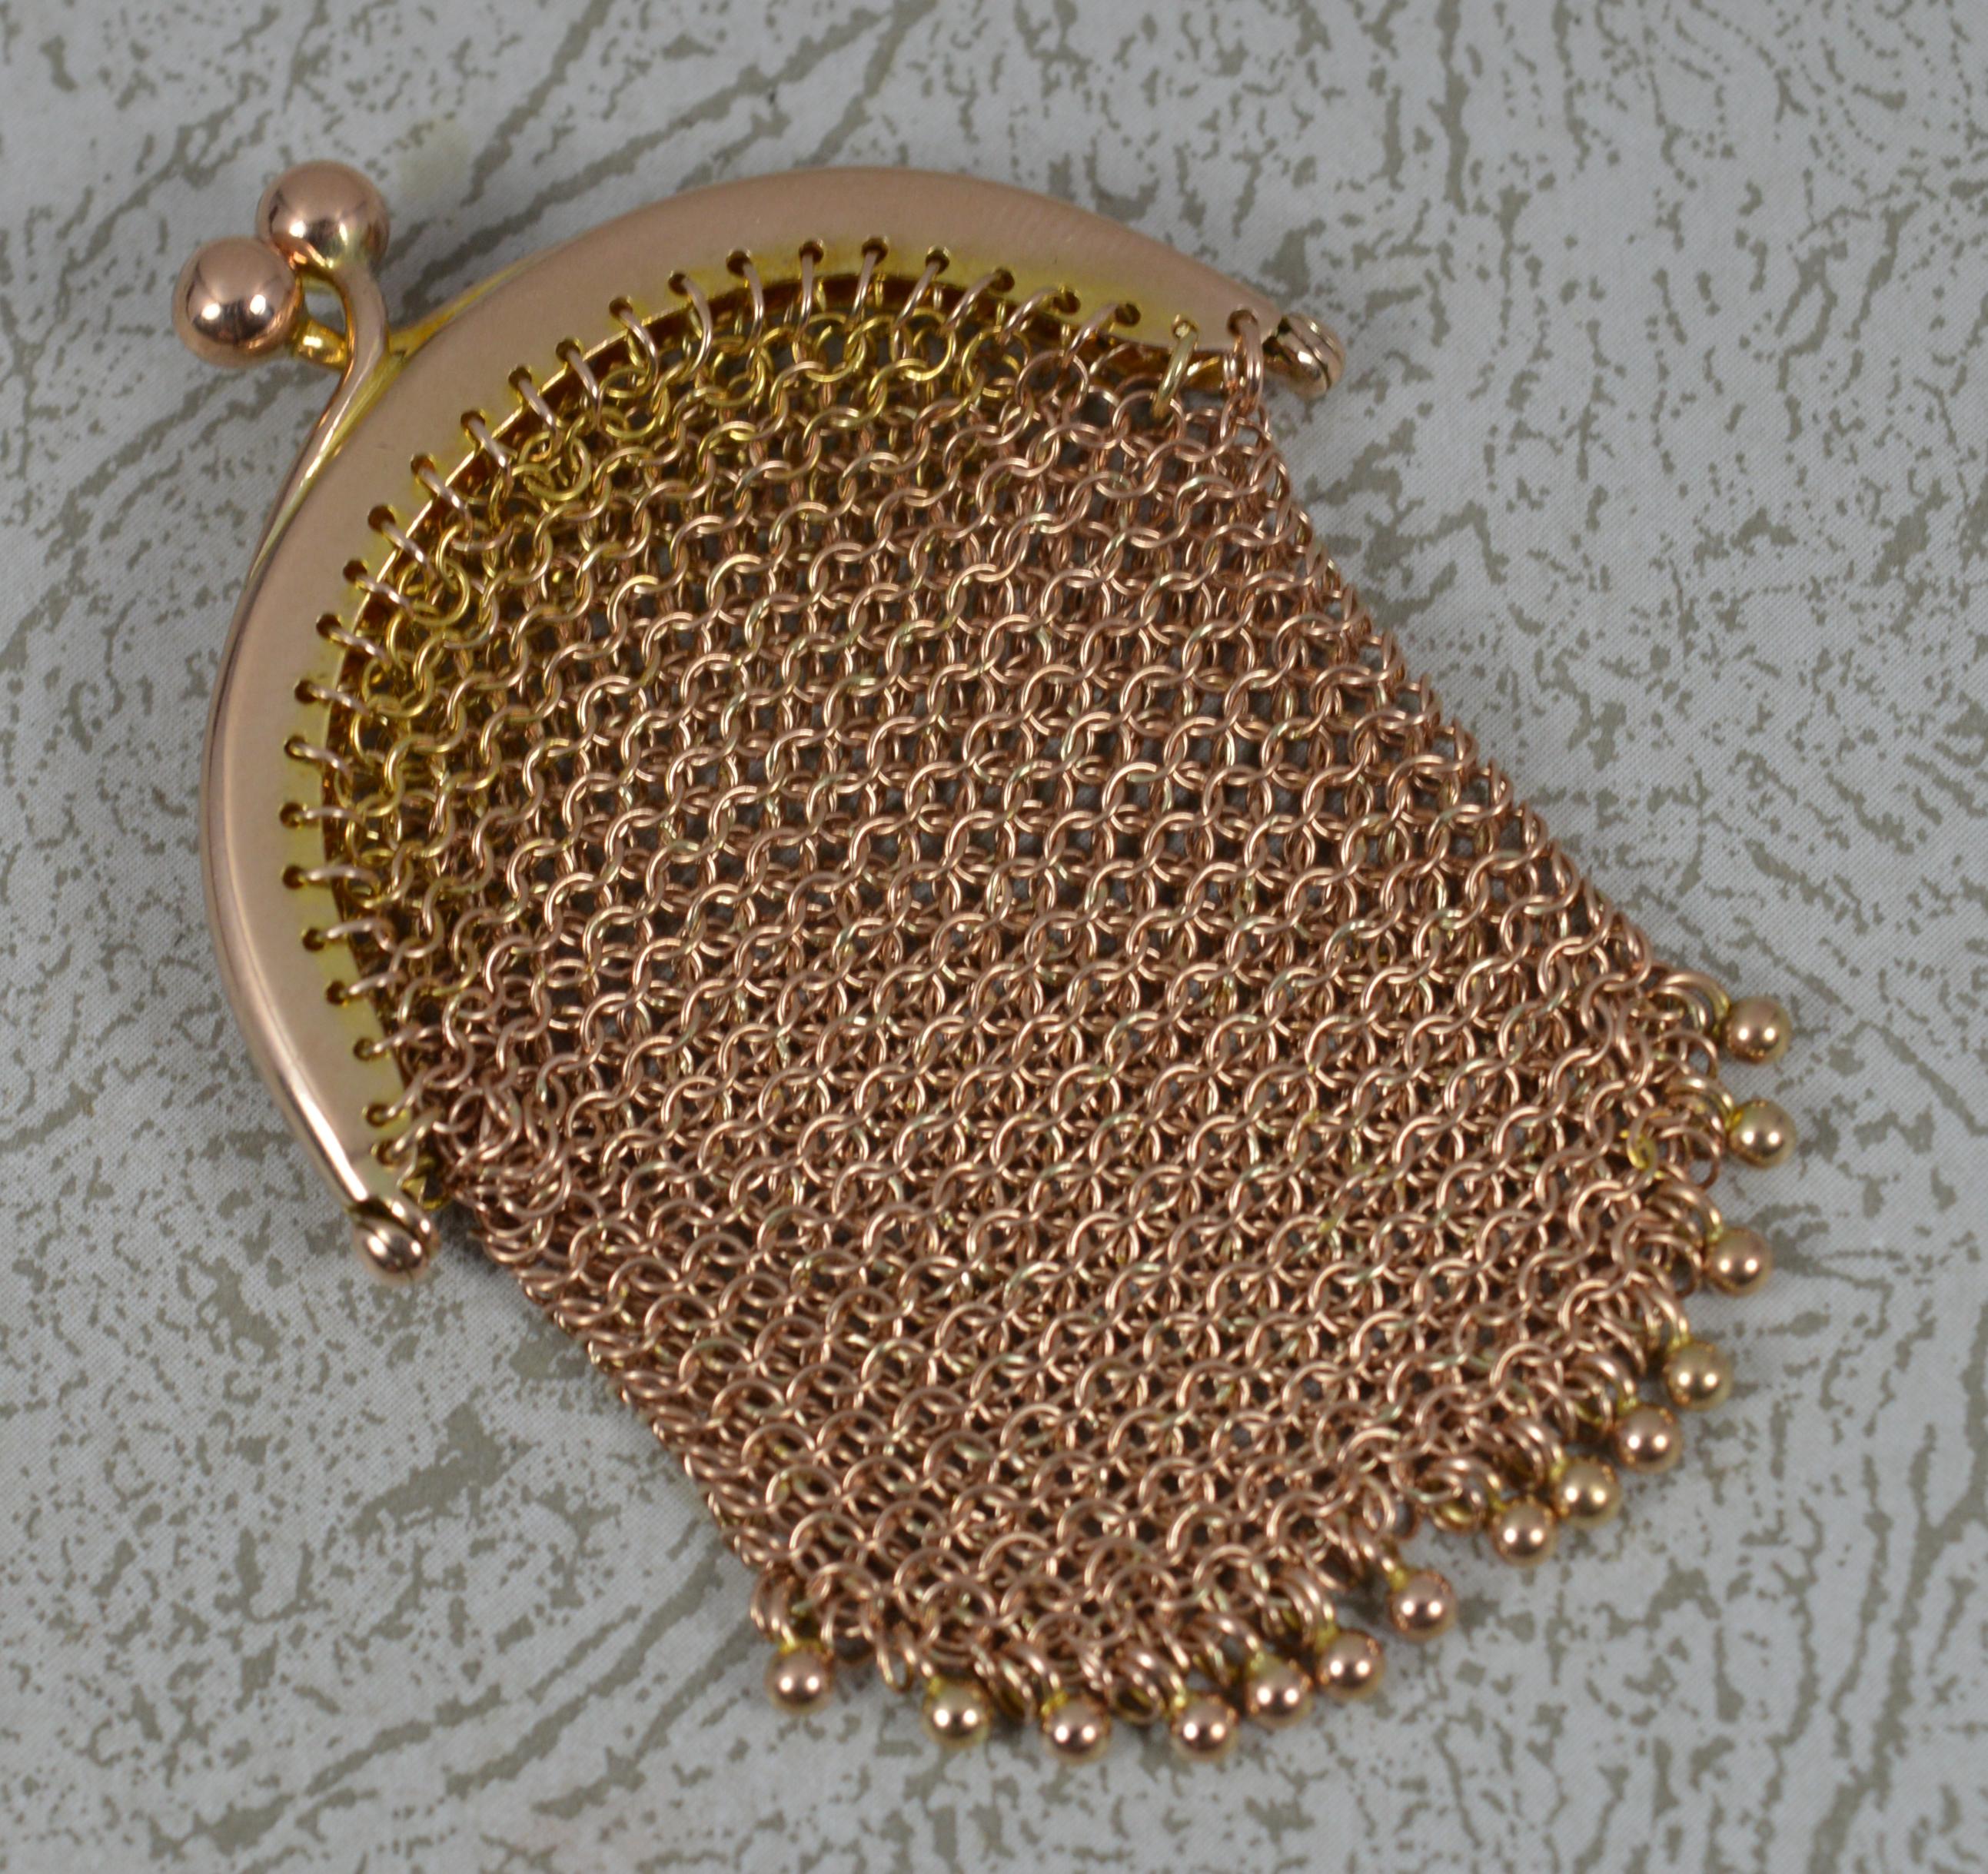 A very fine antique 9ct gold chain mail purse.
Well made example in solid 9 carat rose gold.
A chain mail link with plain top and two ball clasp with ball drops.

Hallmarks ; 9ct
Weight ; 12.2 grams
Size ; 44mm x 60mm bag approx
Condition ; Very